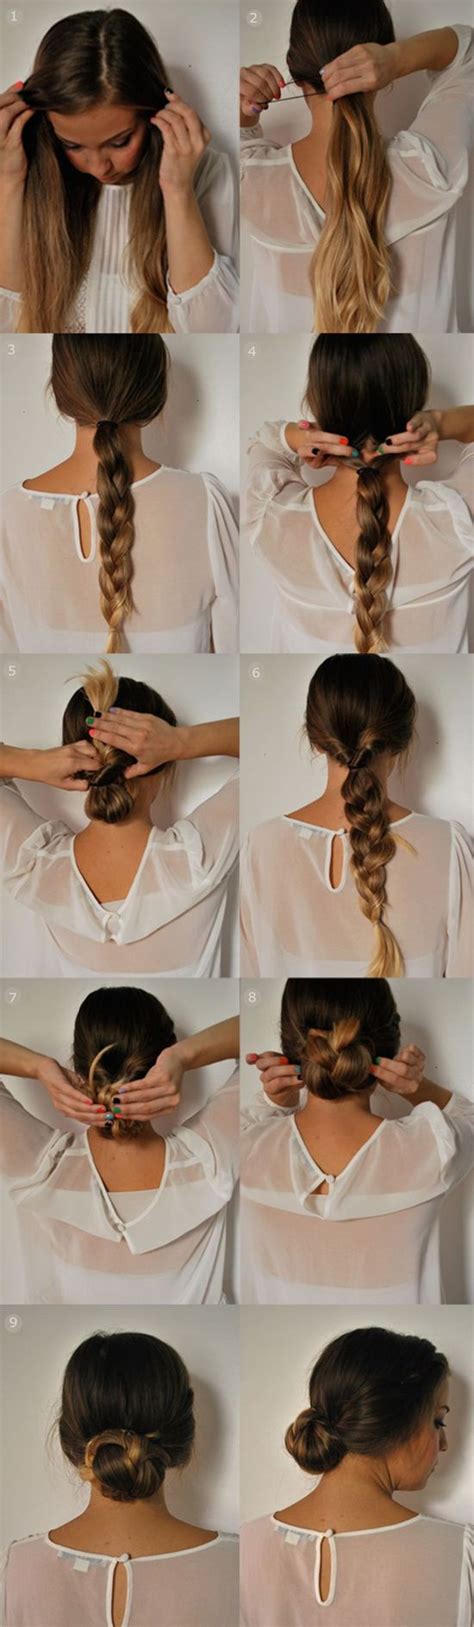 30 Easy 5 Minutes Hairstyles For Women